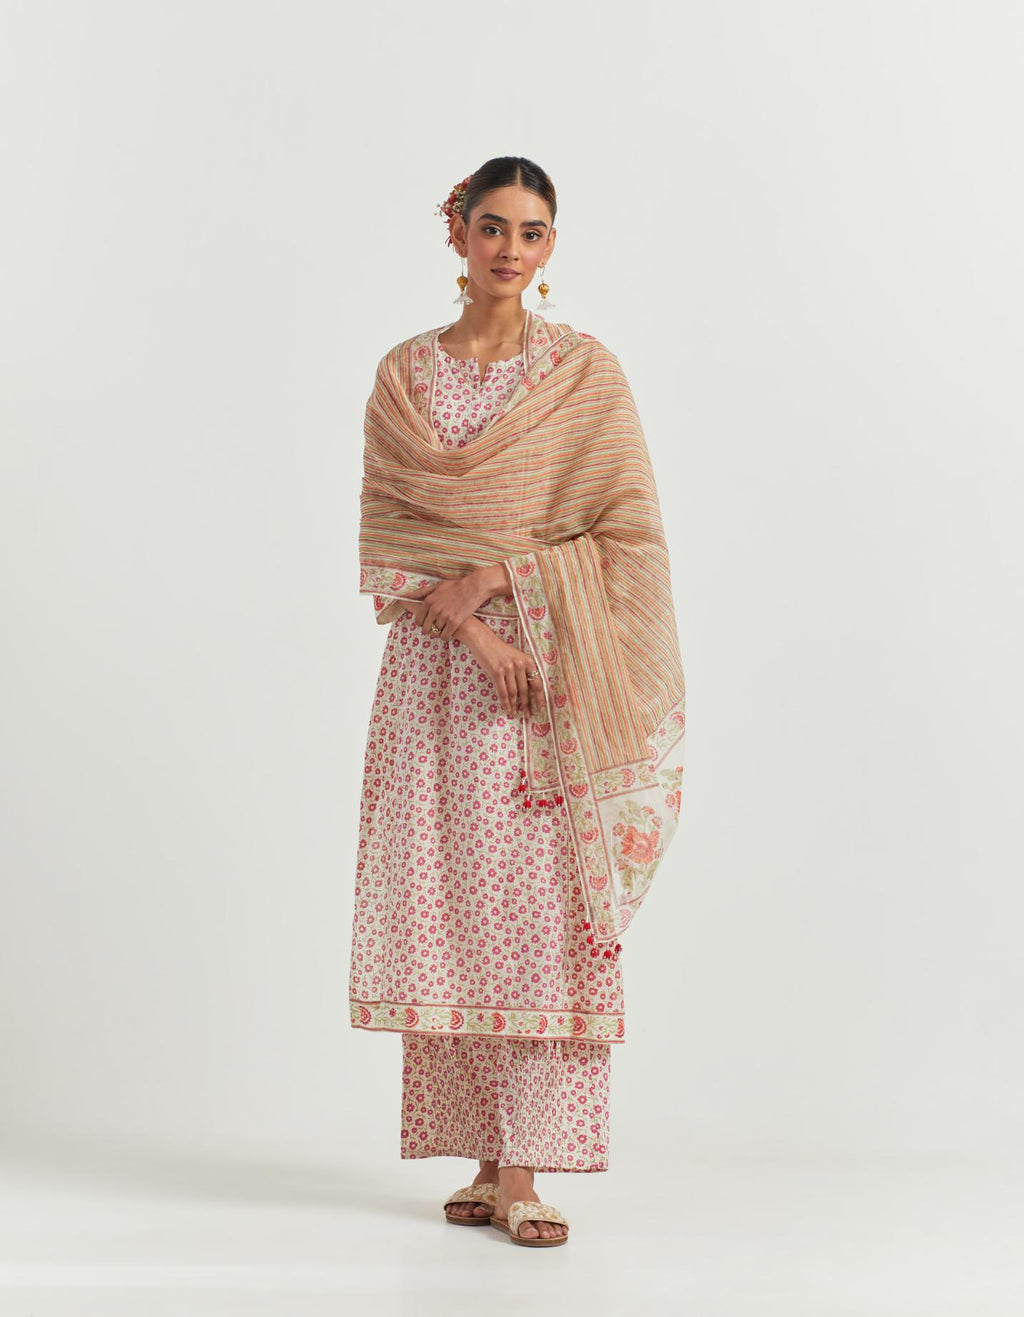 Multi colored cotton hand-block printed kurta set with side panels, detailed with off white ladder lace detailing at side panels.